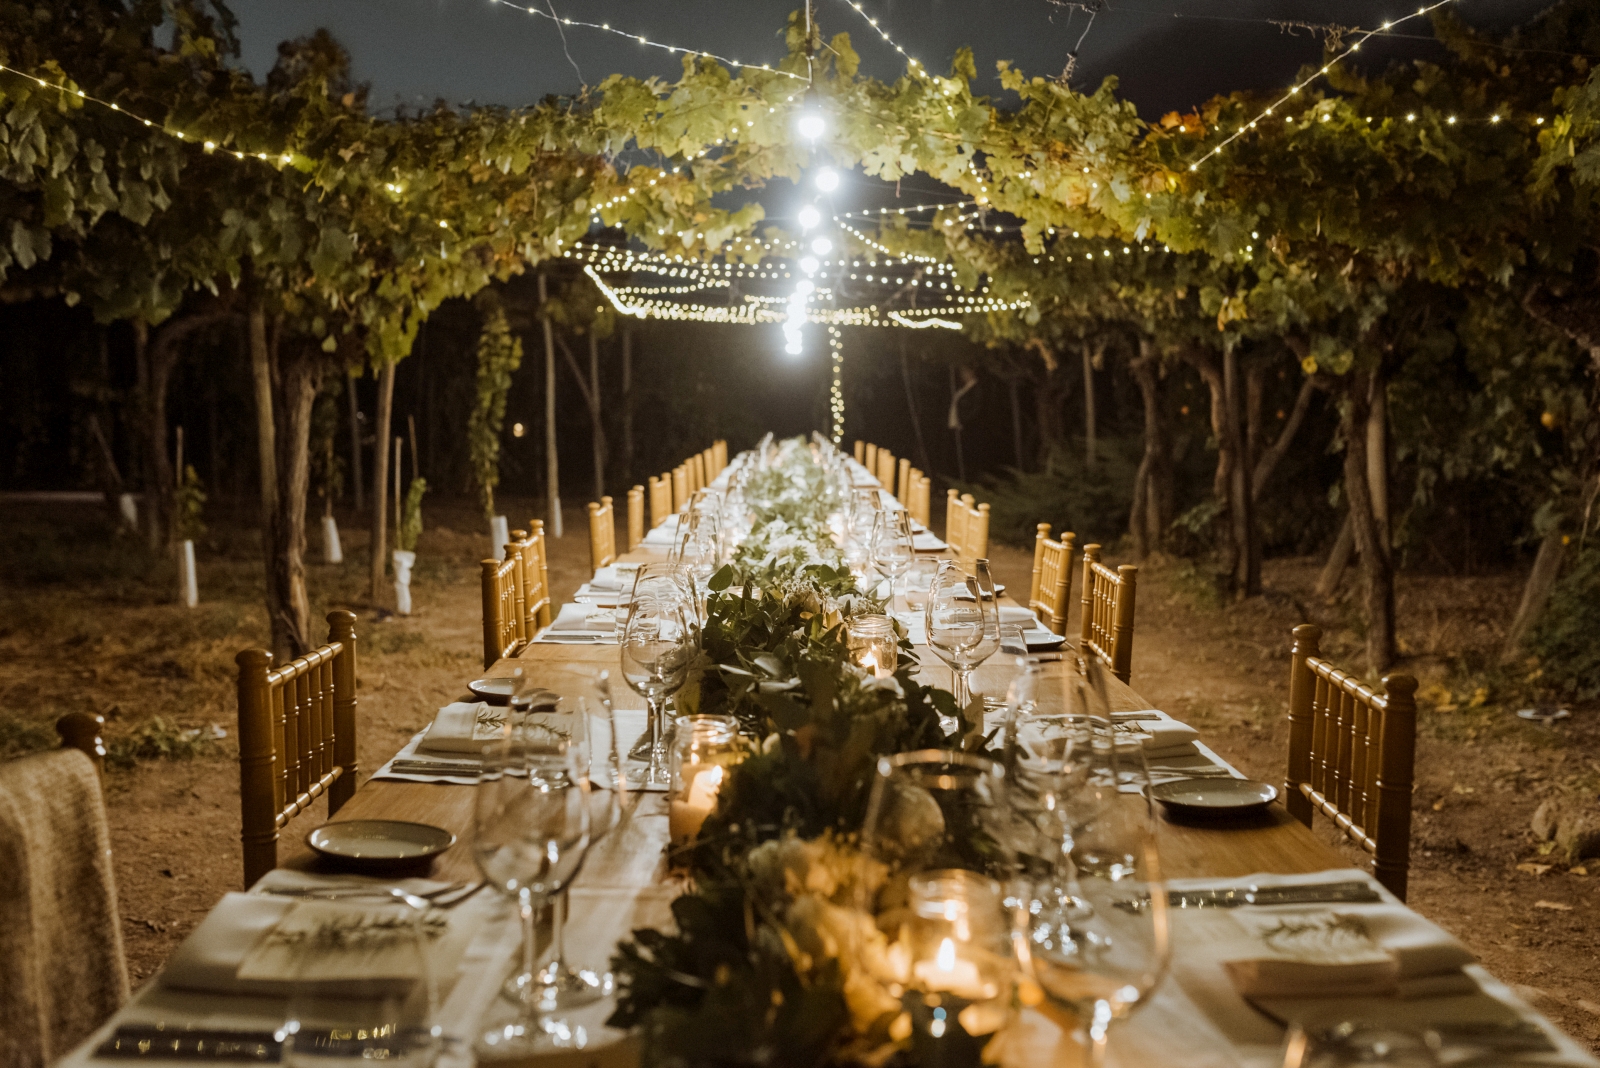 Outdoor Dining at Cavas Wine Lodge in Argentina